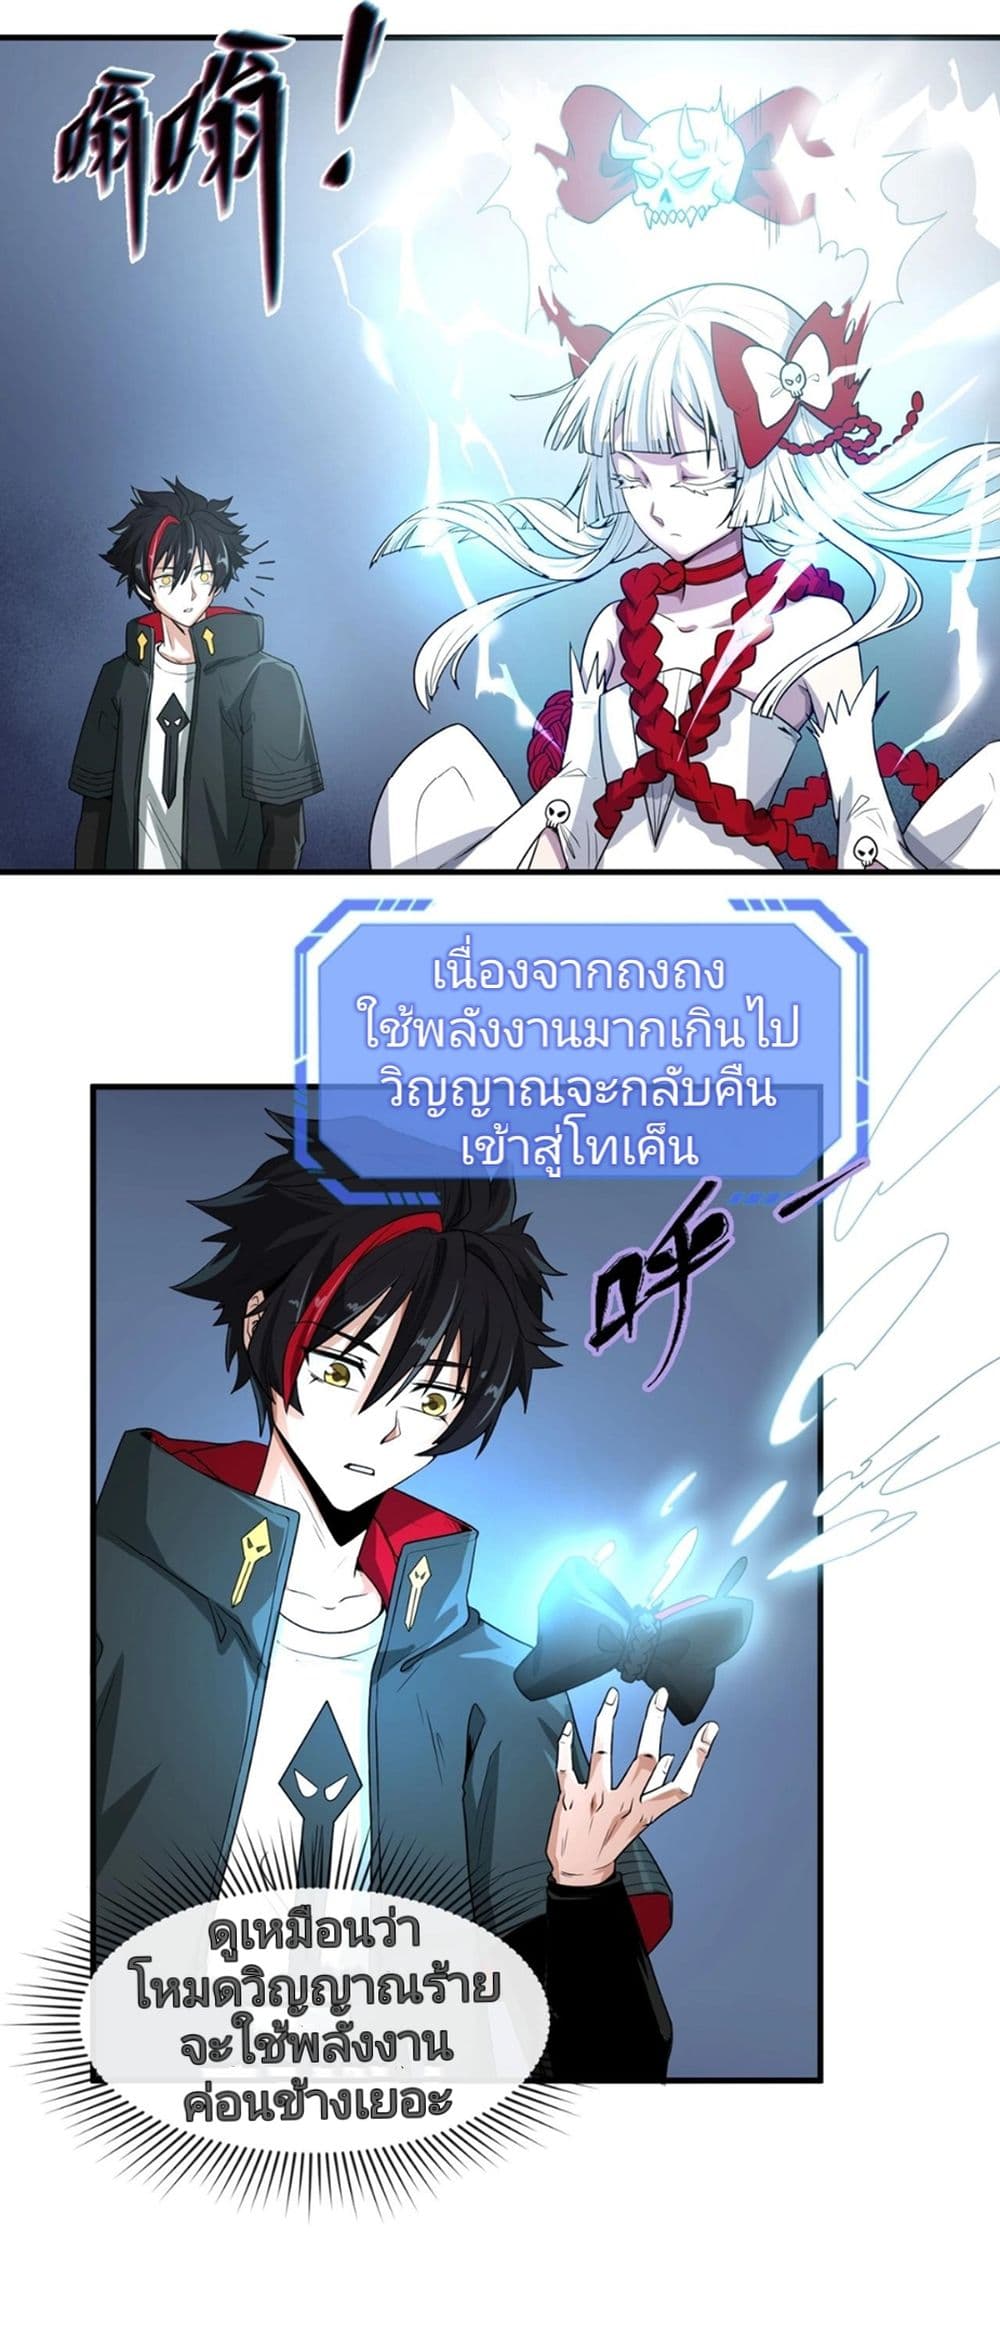 The Age of Ghost Spirits à¸à¸­à¸à¸à¸µà¹ 2 (32)